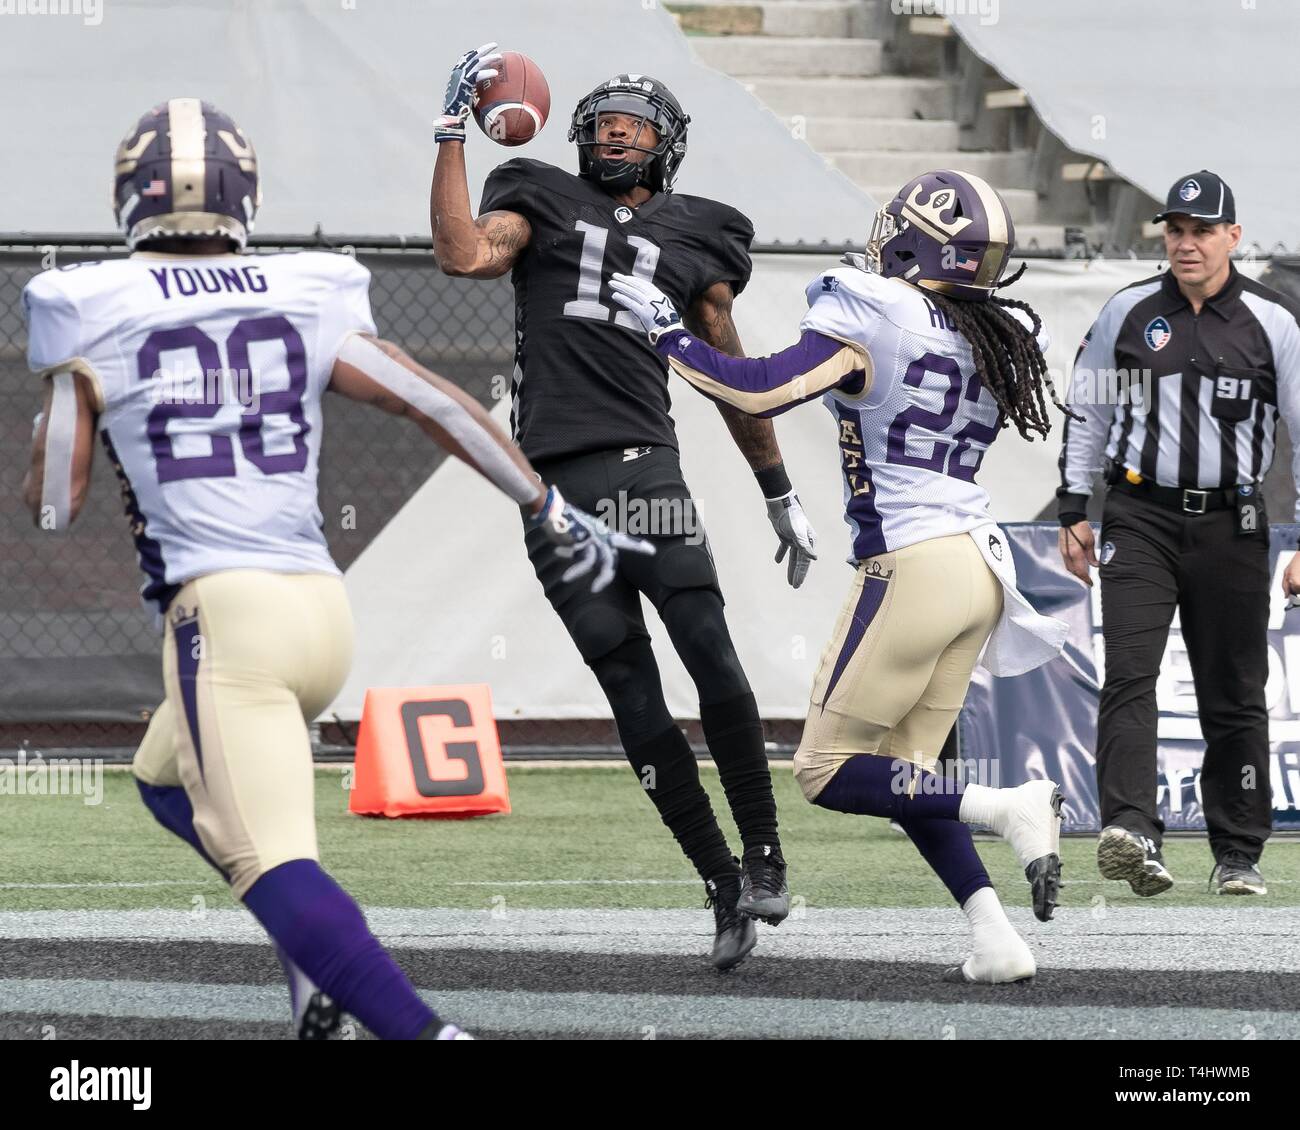 Birmingham, Alabama, USA. 31st Mar, 2019. The Birmingham Iron and the Atlanta Legends faced off in what was ultimately the last game for the two teams as the league dissolved just two days later. The Iron's home field is Legion Field, where the University of Alabama at Birmingham (UAB) plays. WR QUINTON PATTON (11) makes one-handed touchdown catch. Credit: Jeremy Raines/ZUMA Wire/Alamy Live News Stock Photo